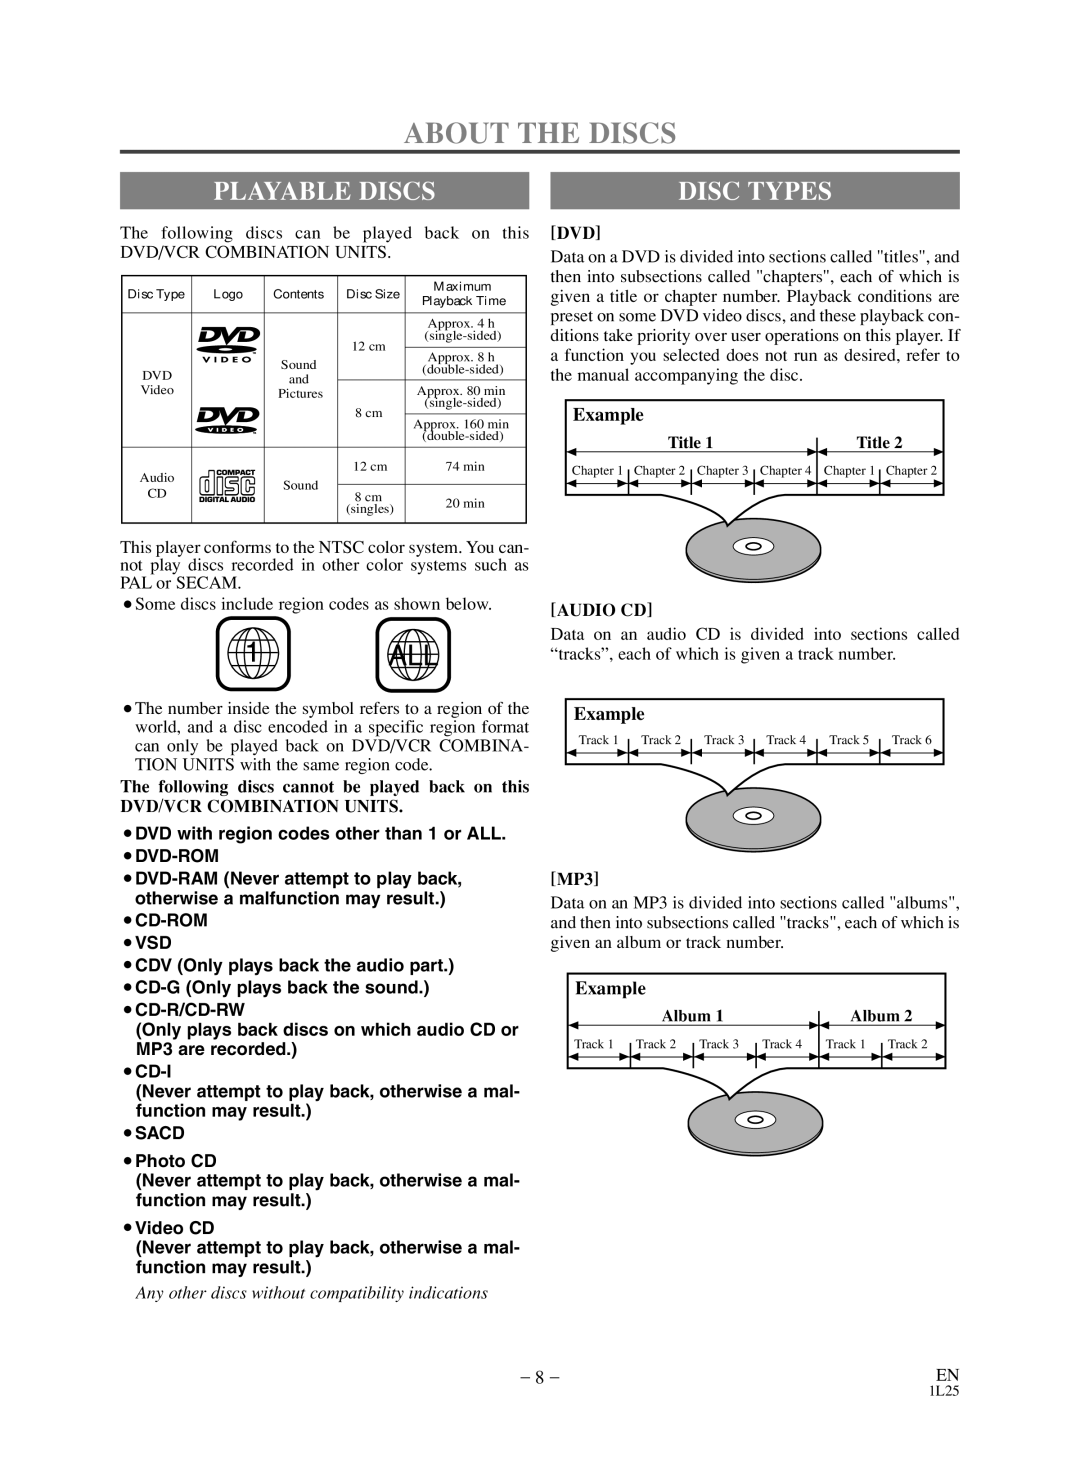 Sylvania SSD800 owner manual About the Discs, Playable Discs, Example, Following discs cannot be played back on this, MP3 